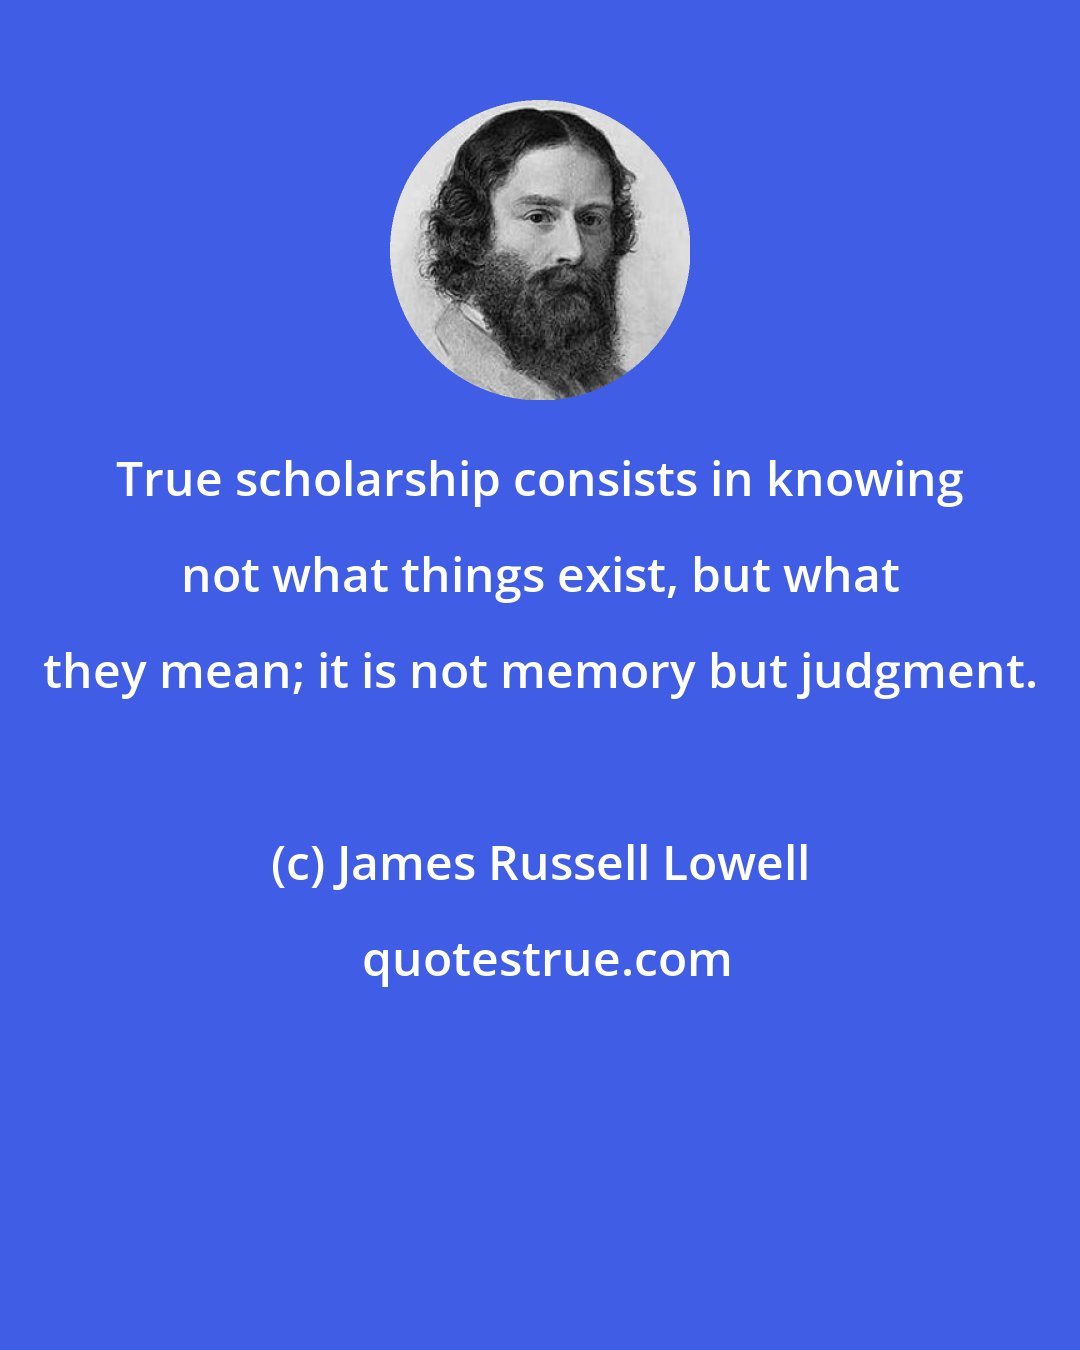 James Russell Lowell: True scholarship consists in knowing not what things exist, but what they mean; it is not memory but judgment.